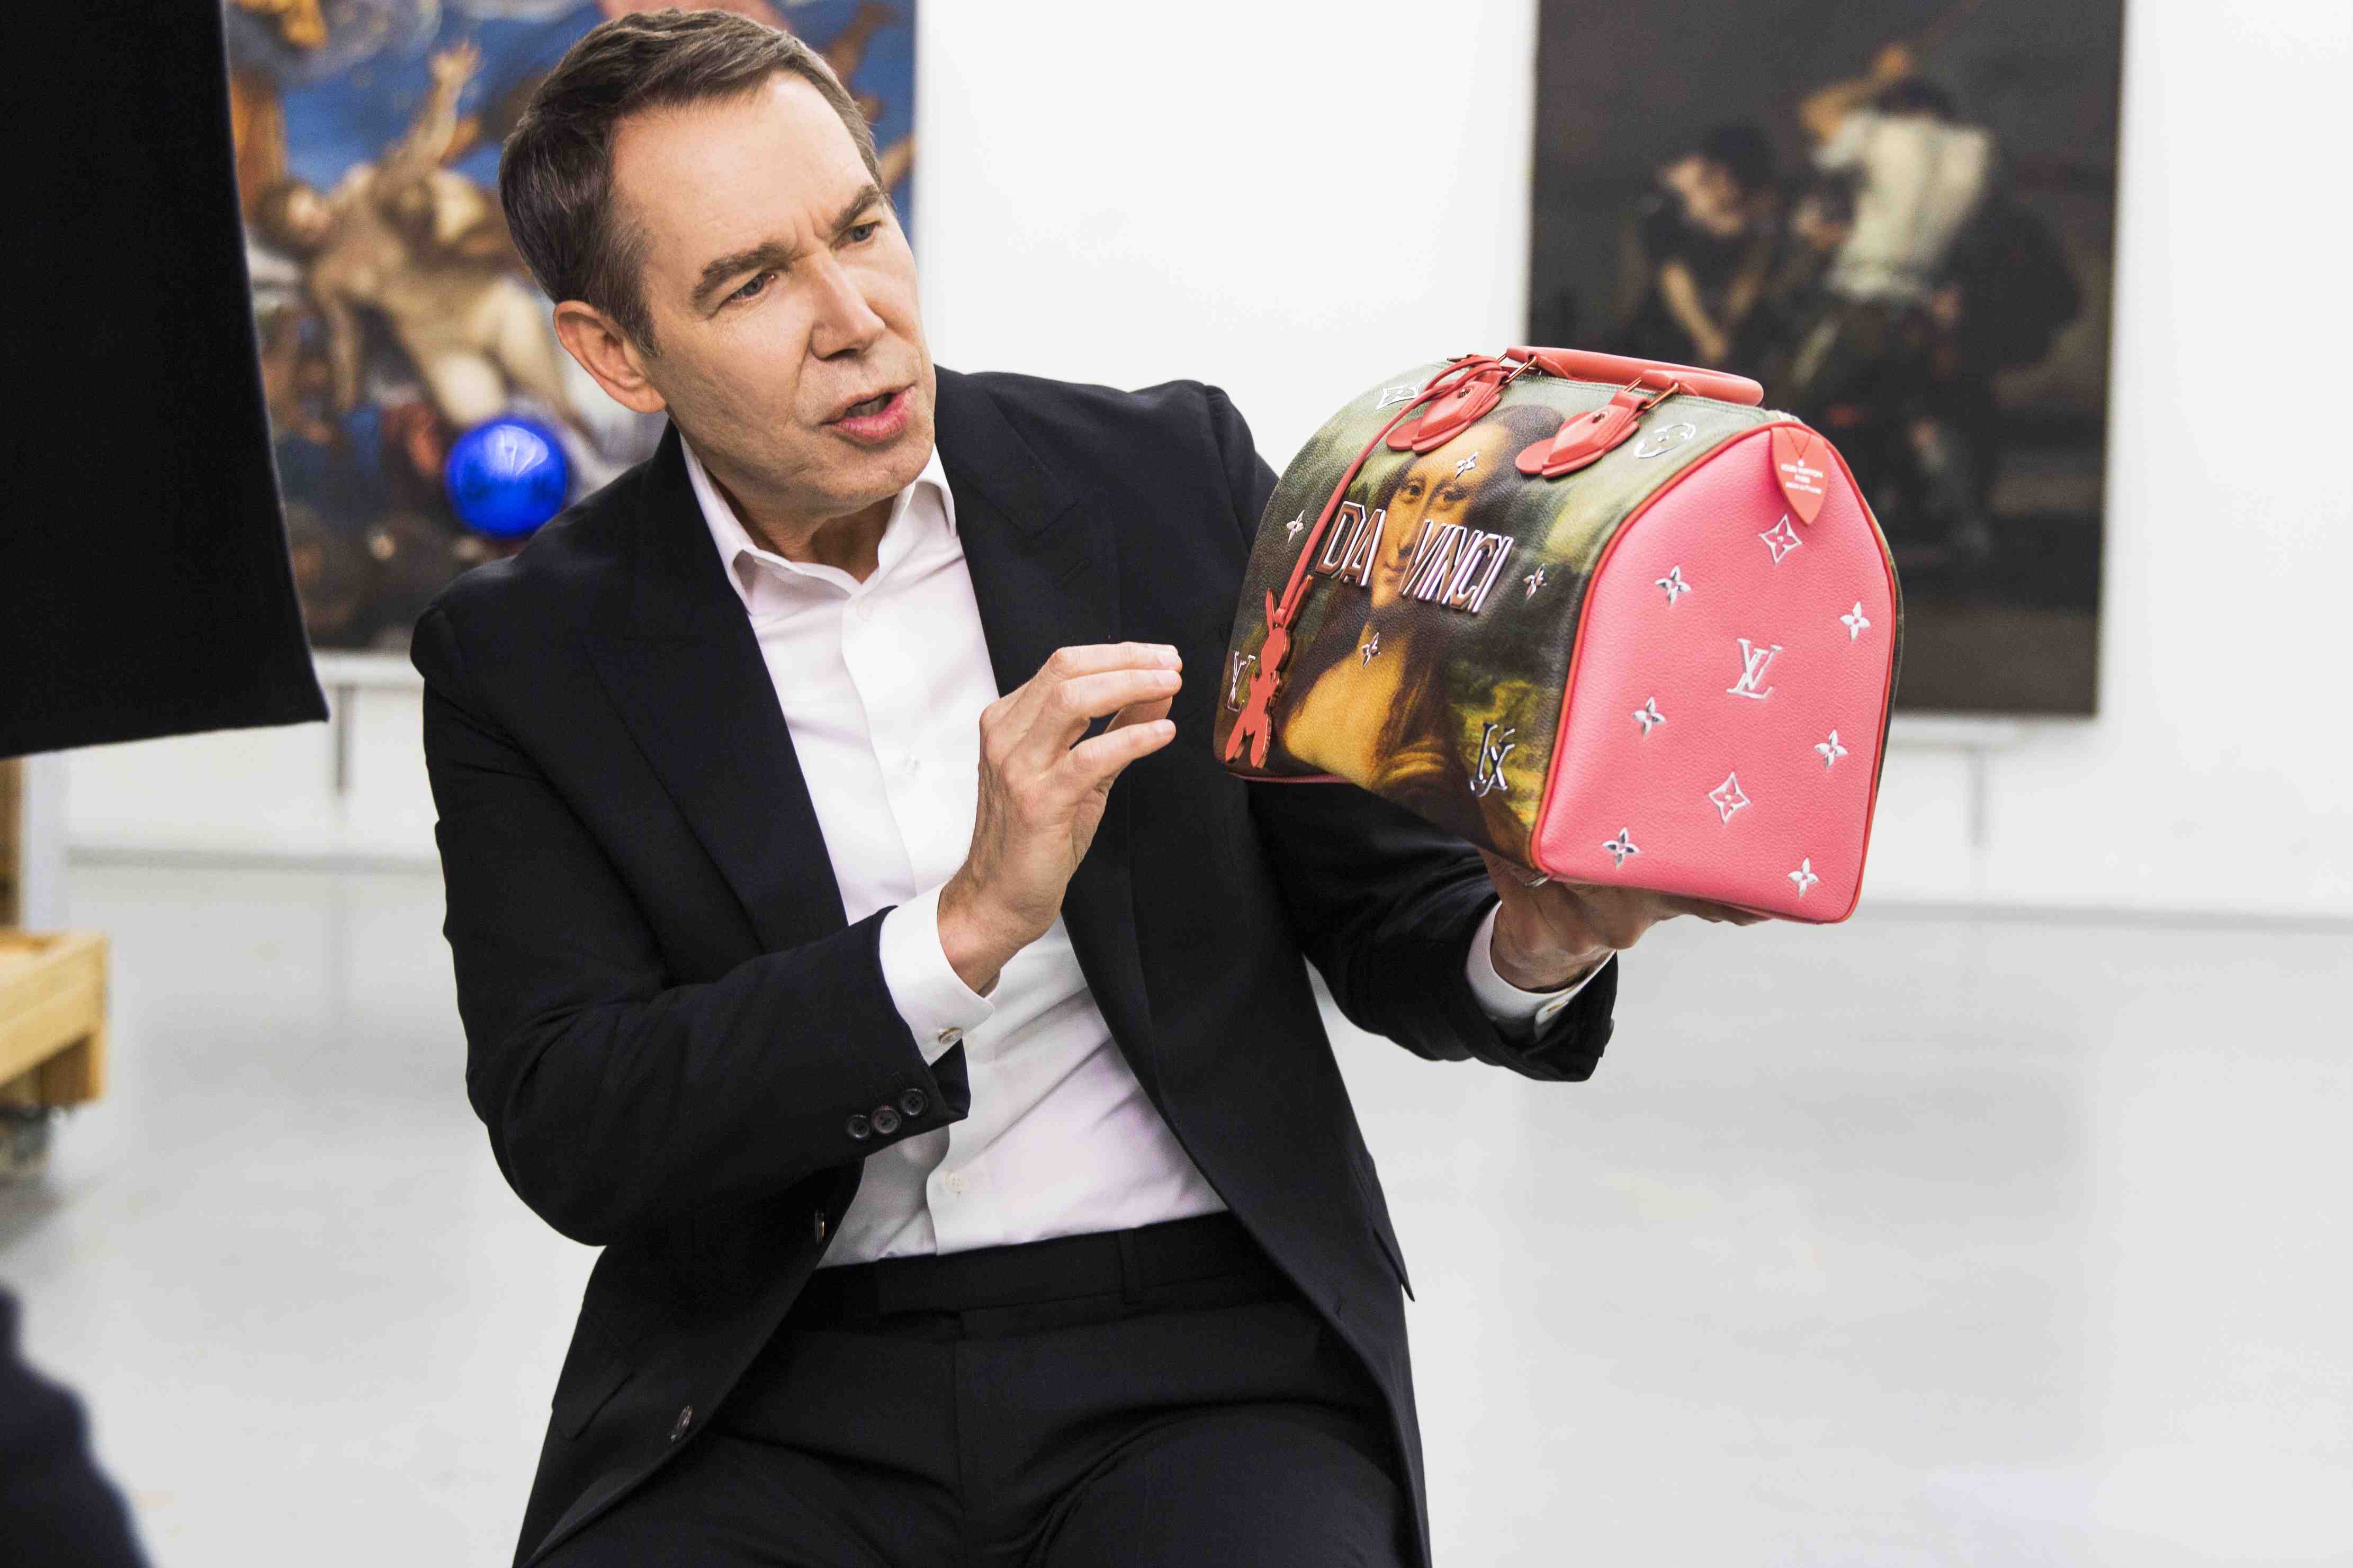 Jeff Koons  Louis Vuitton Da Vinci bag (signed and dated by Jeff